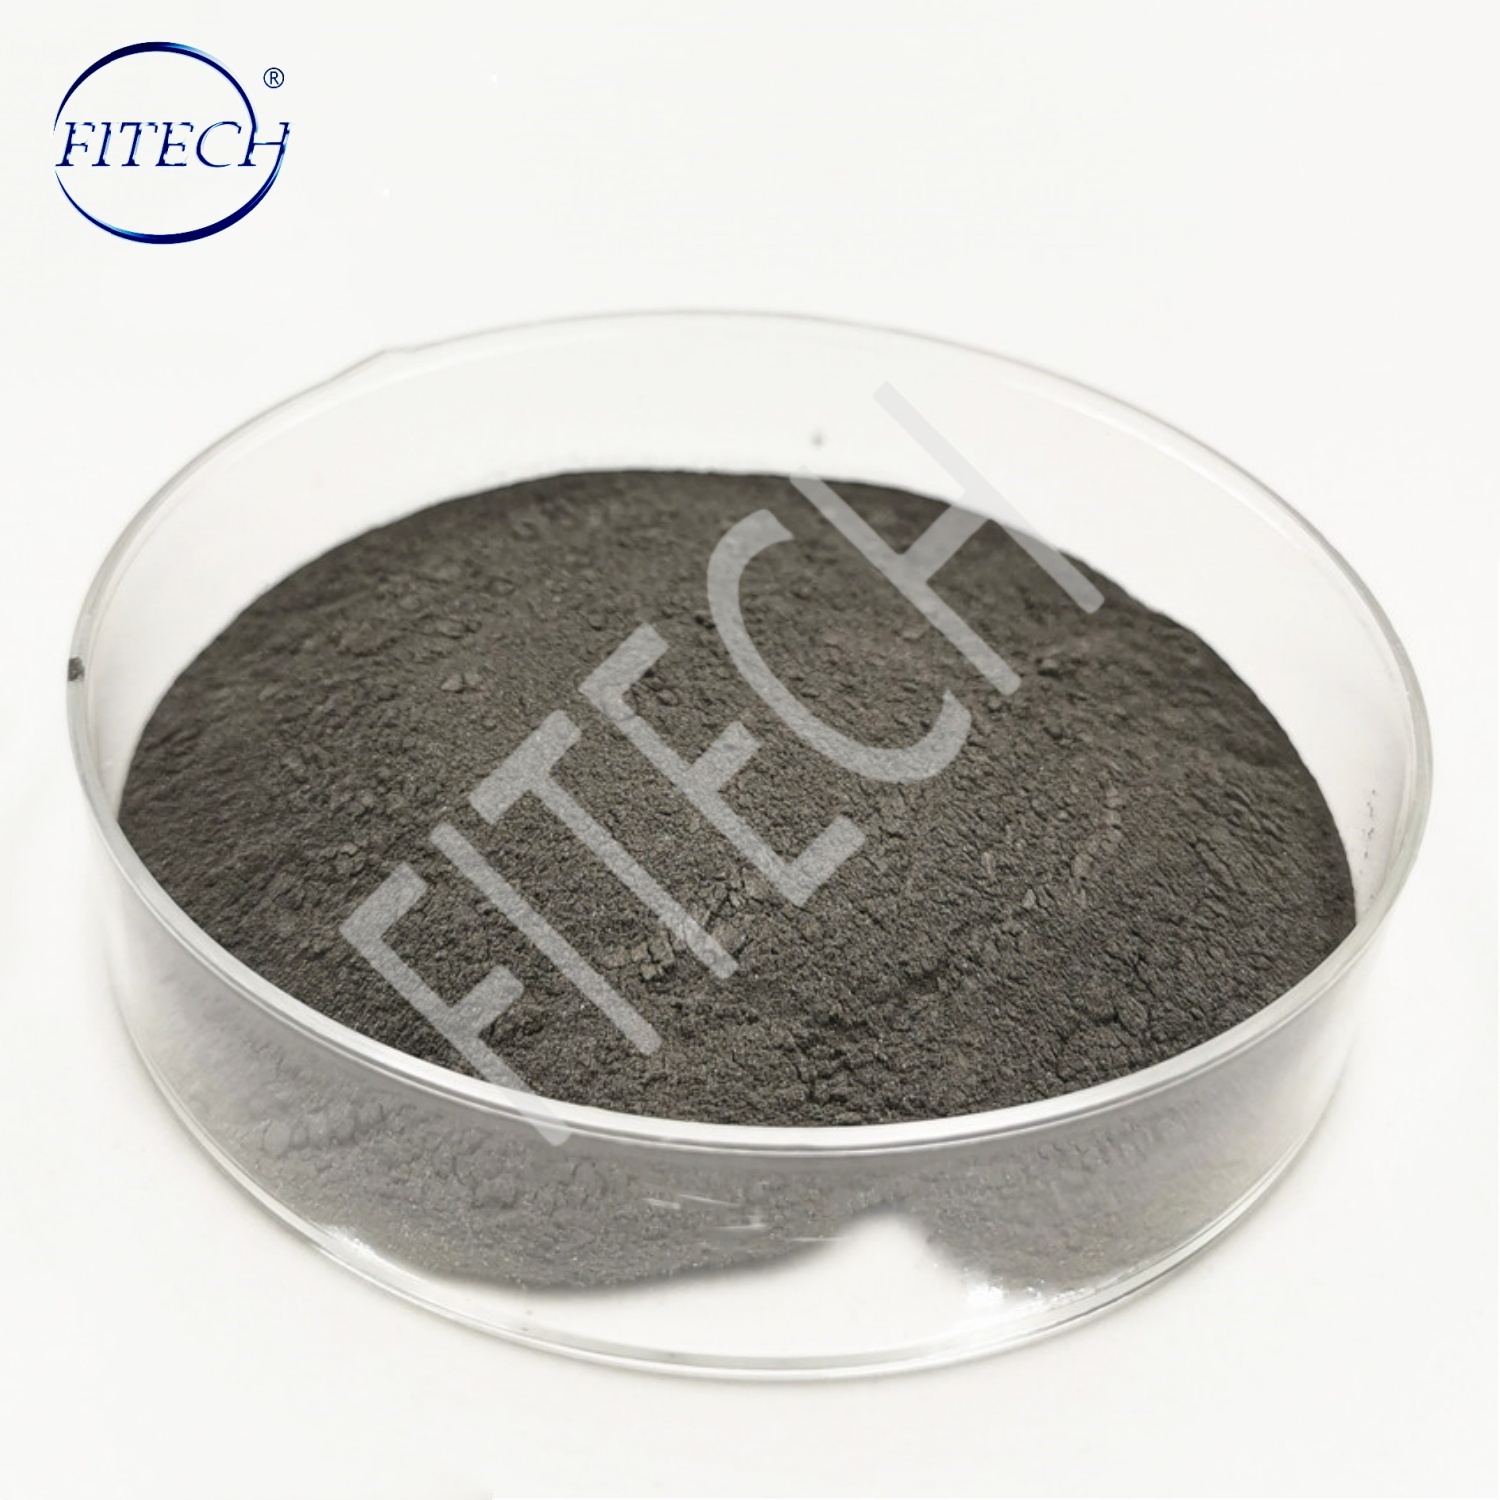 High Grade Low Alloy Steel Powder AISI8620/ 4340